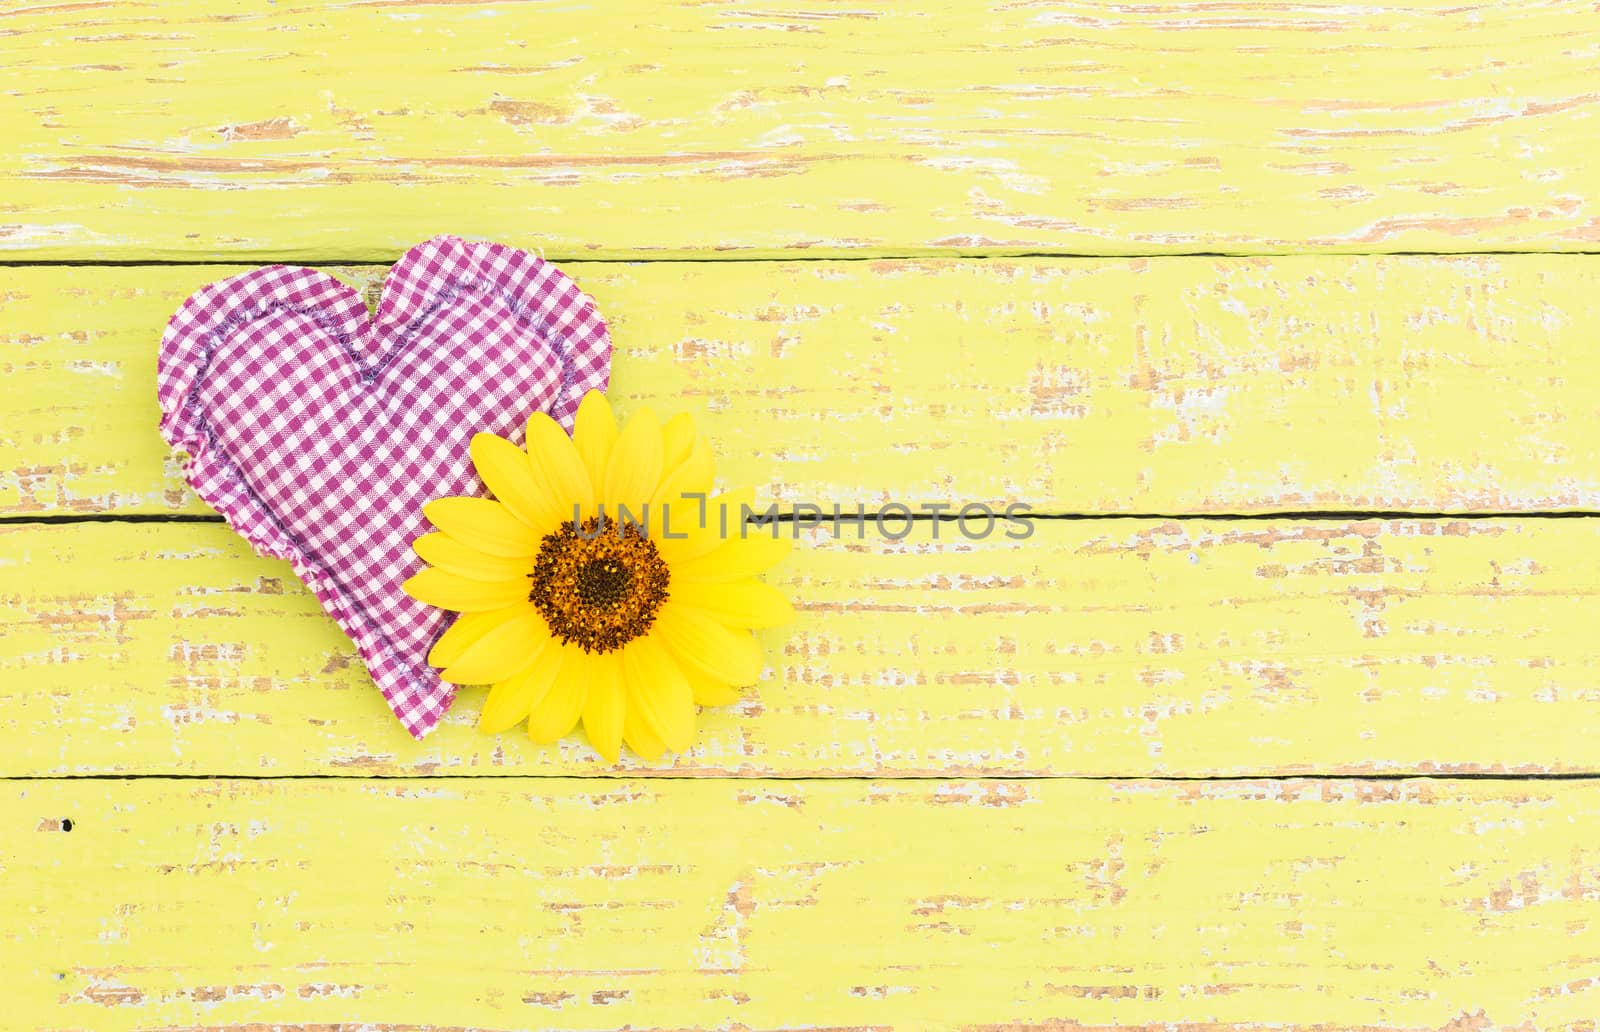 Fabric heart with blossom on rustic background with copy space